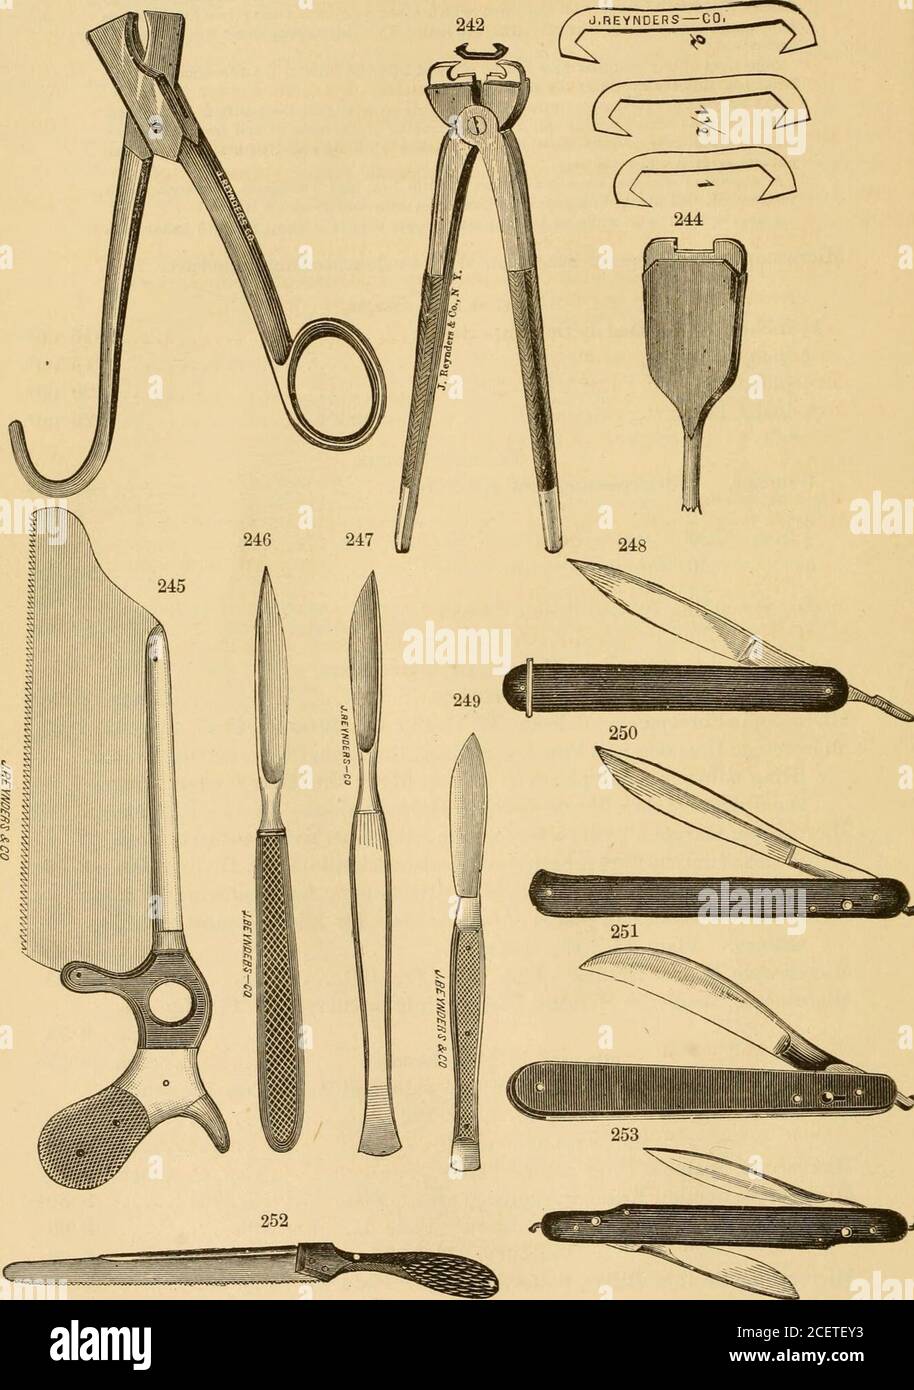 . Illustrated alphabetical register of veterinary instruments, anatomical models, books, &c.. mallpiecesof skin, for microscopical examinations. PI. 17. Fig. 205. 3 00*Microscopic Harpoon with SHde, for removing from living subjects small pieces of muscle fibre for microscopical examinations. PI. 17. Fig. 203a 3 50Microscopic Instrument with Spiral Attachment, for removing fromUving subjects small pieces of muscle fibre, for microscopical exami-nations. Plate 17. Fig. 203 B 3 00* Microscopic Needle Holder. Plate 17. Fig. 196 1 25 Microscopic Needles in Handles, best, straight or curved. PI. 17 Stock Photo